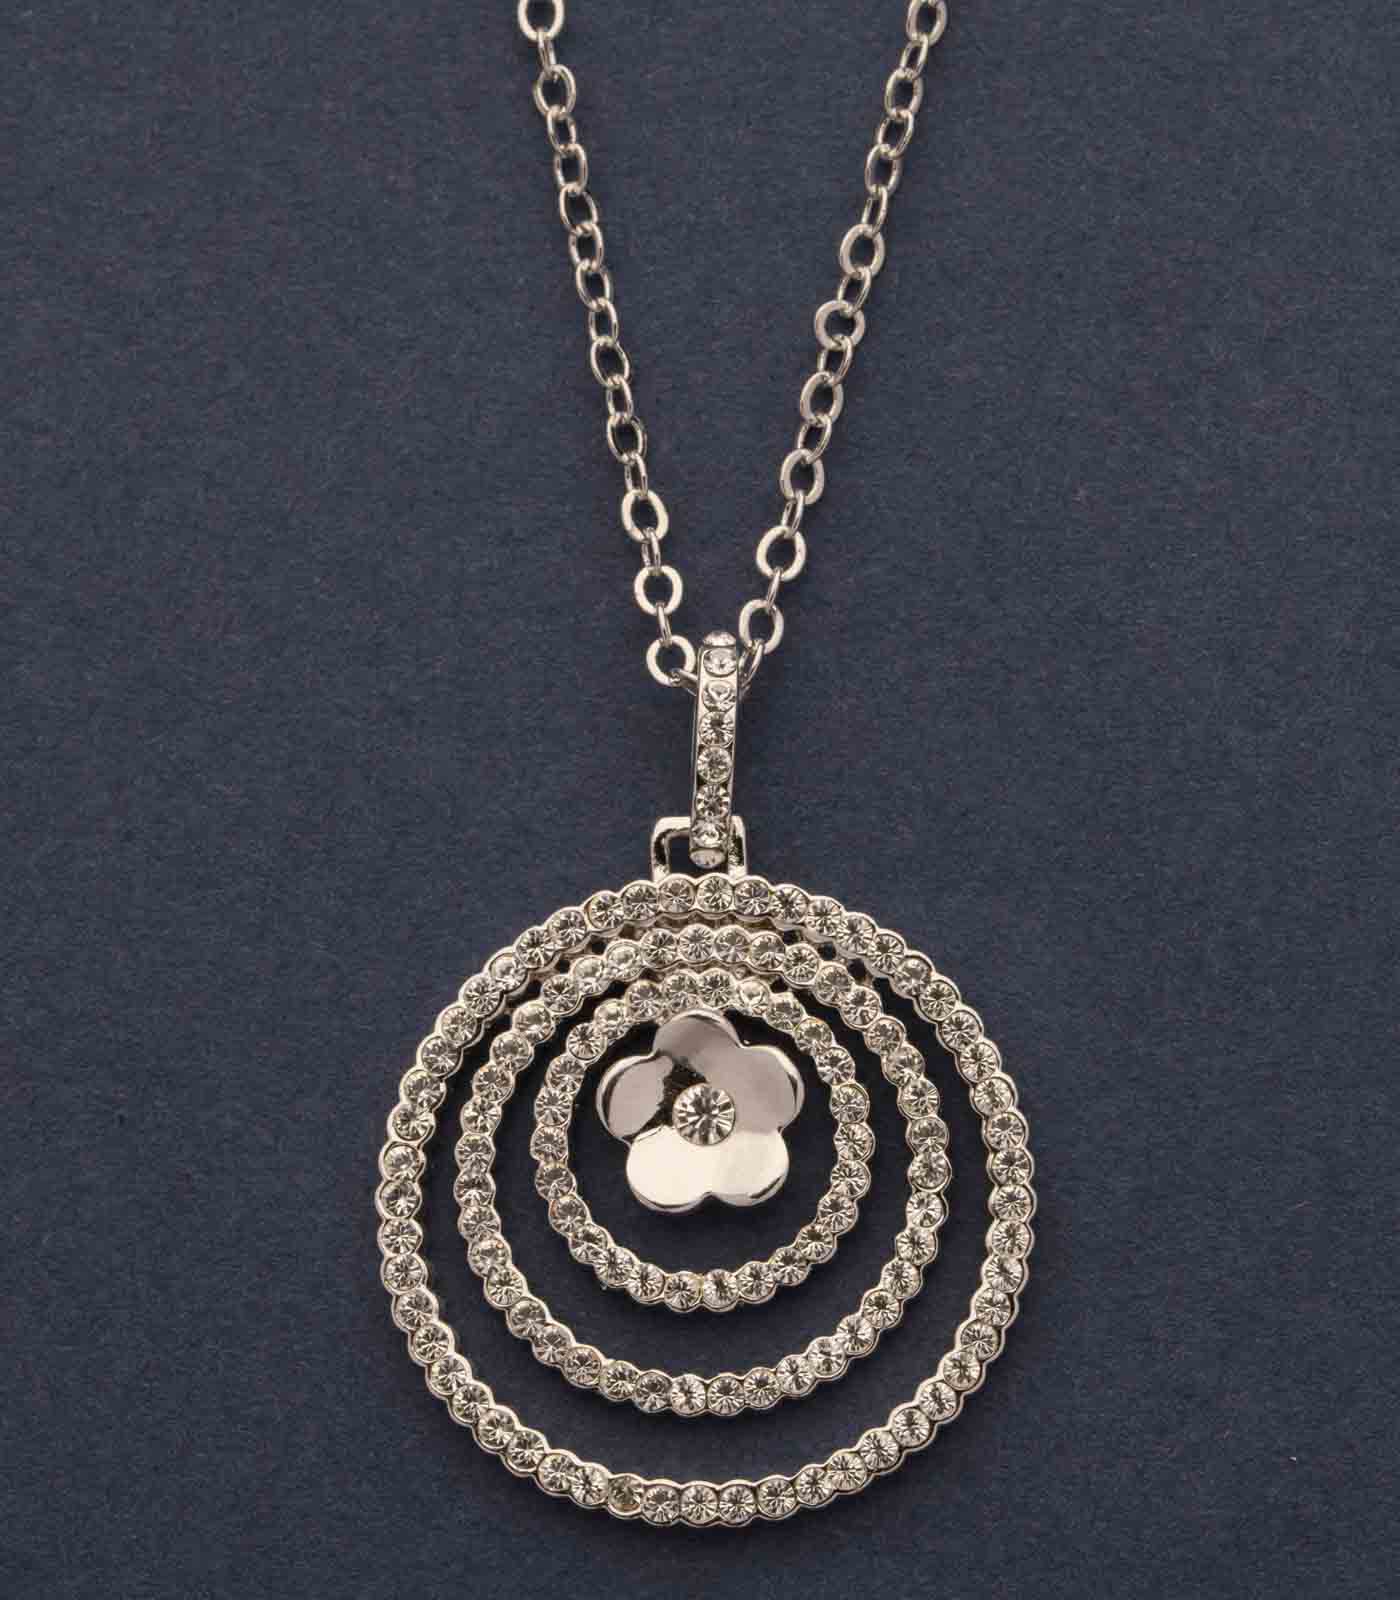 Decorative Concentric Loops Of Silver Flower Necklace (Brass)